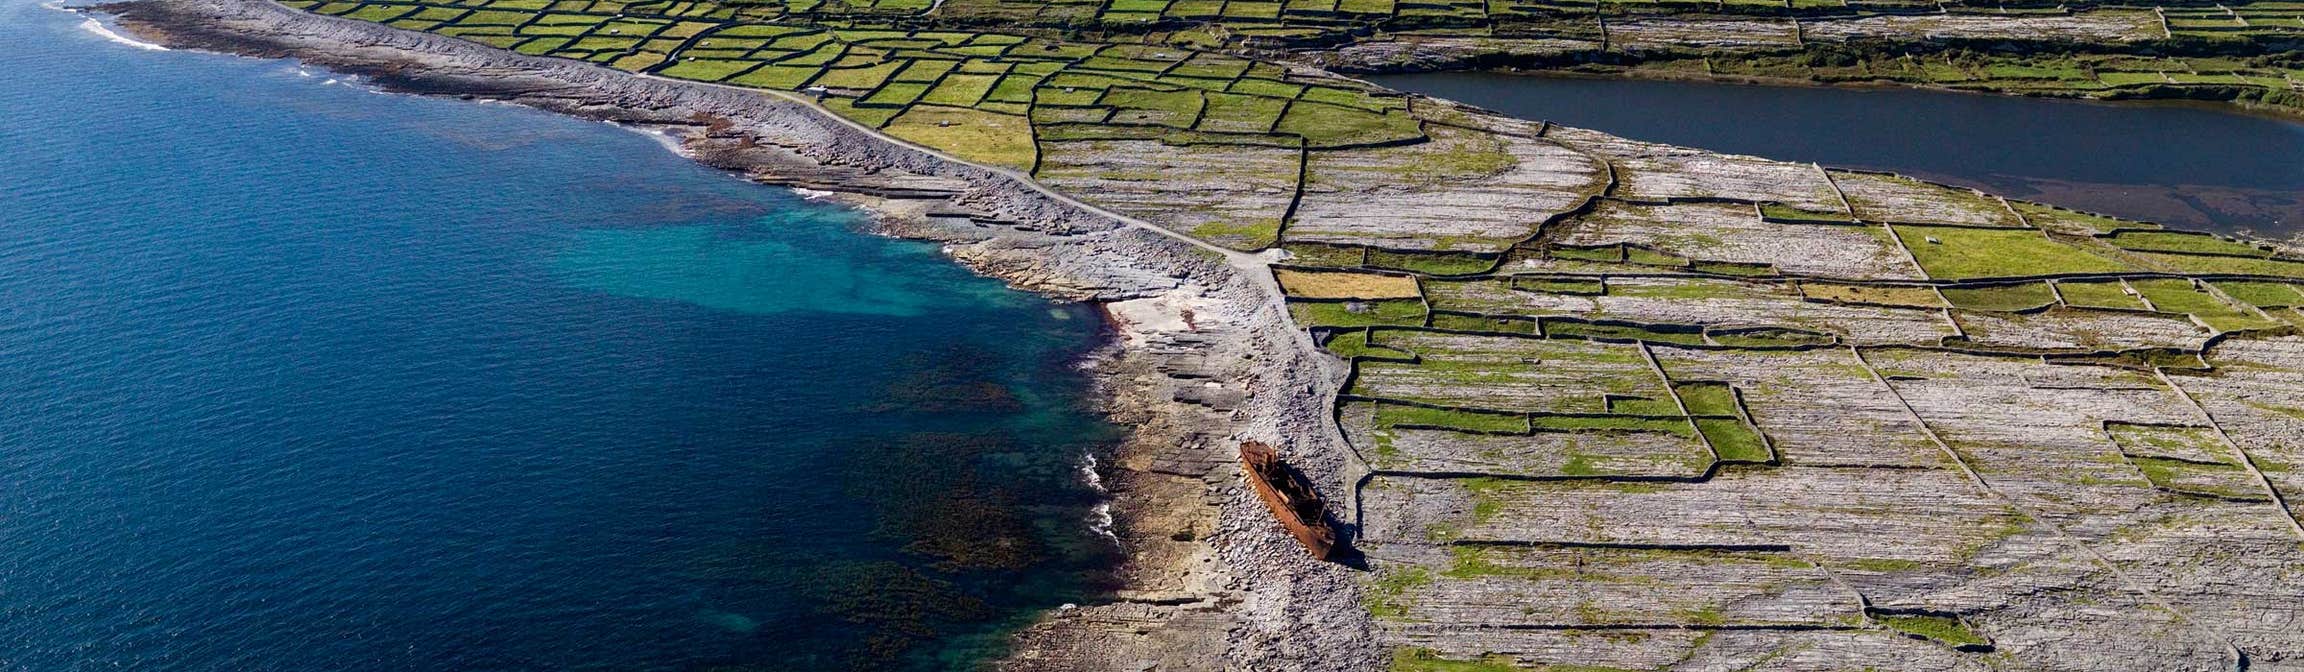 Aerial view of Inisheer with Plassey shipwreck, Aran Islands, County Galway